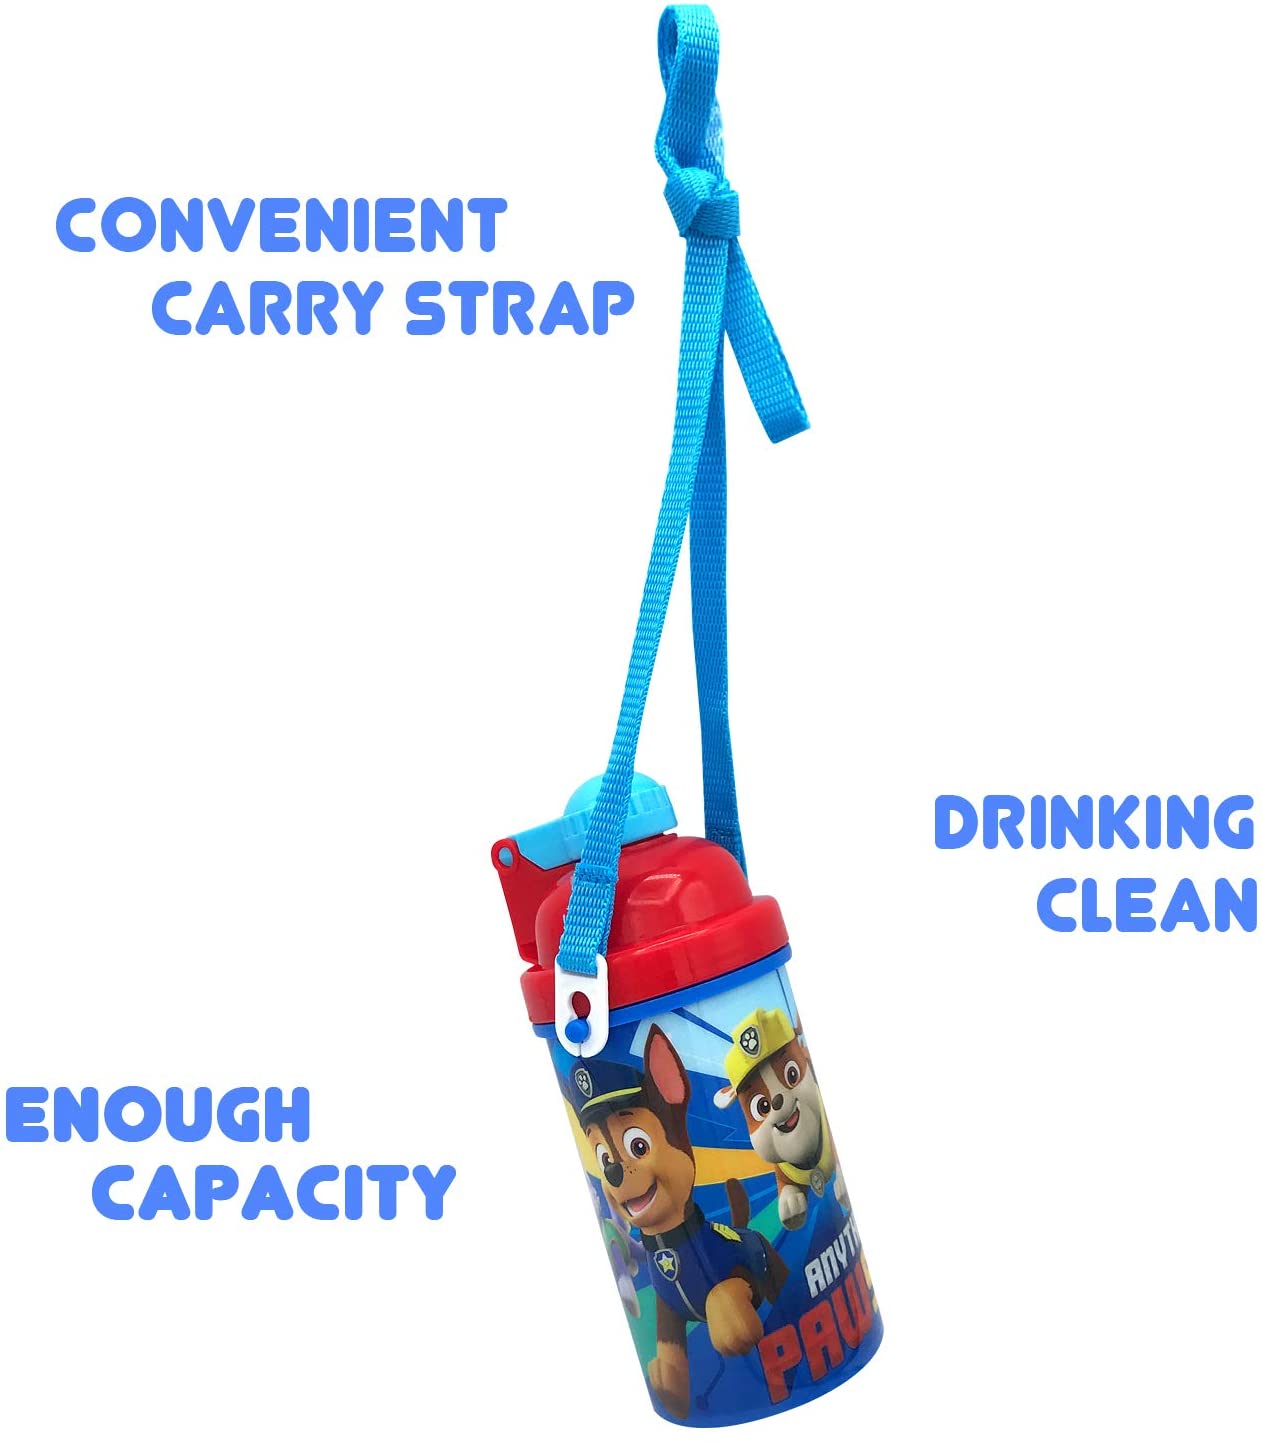 Paw Patrol Friends Carrying Strap One Touch Water Bottles with Reusable Built in Straw - BPA free, Easy to Clean.